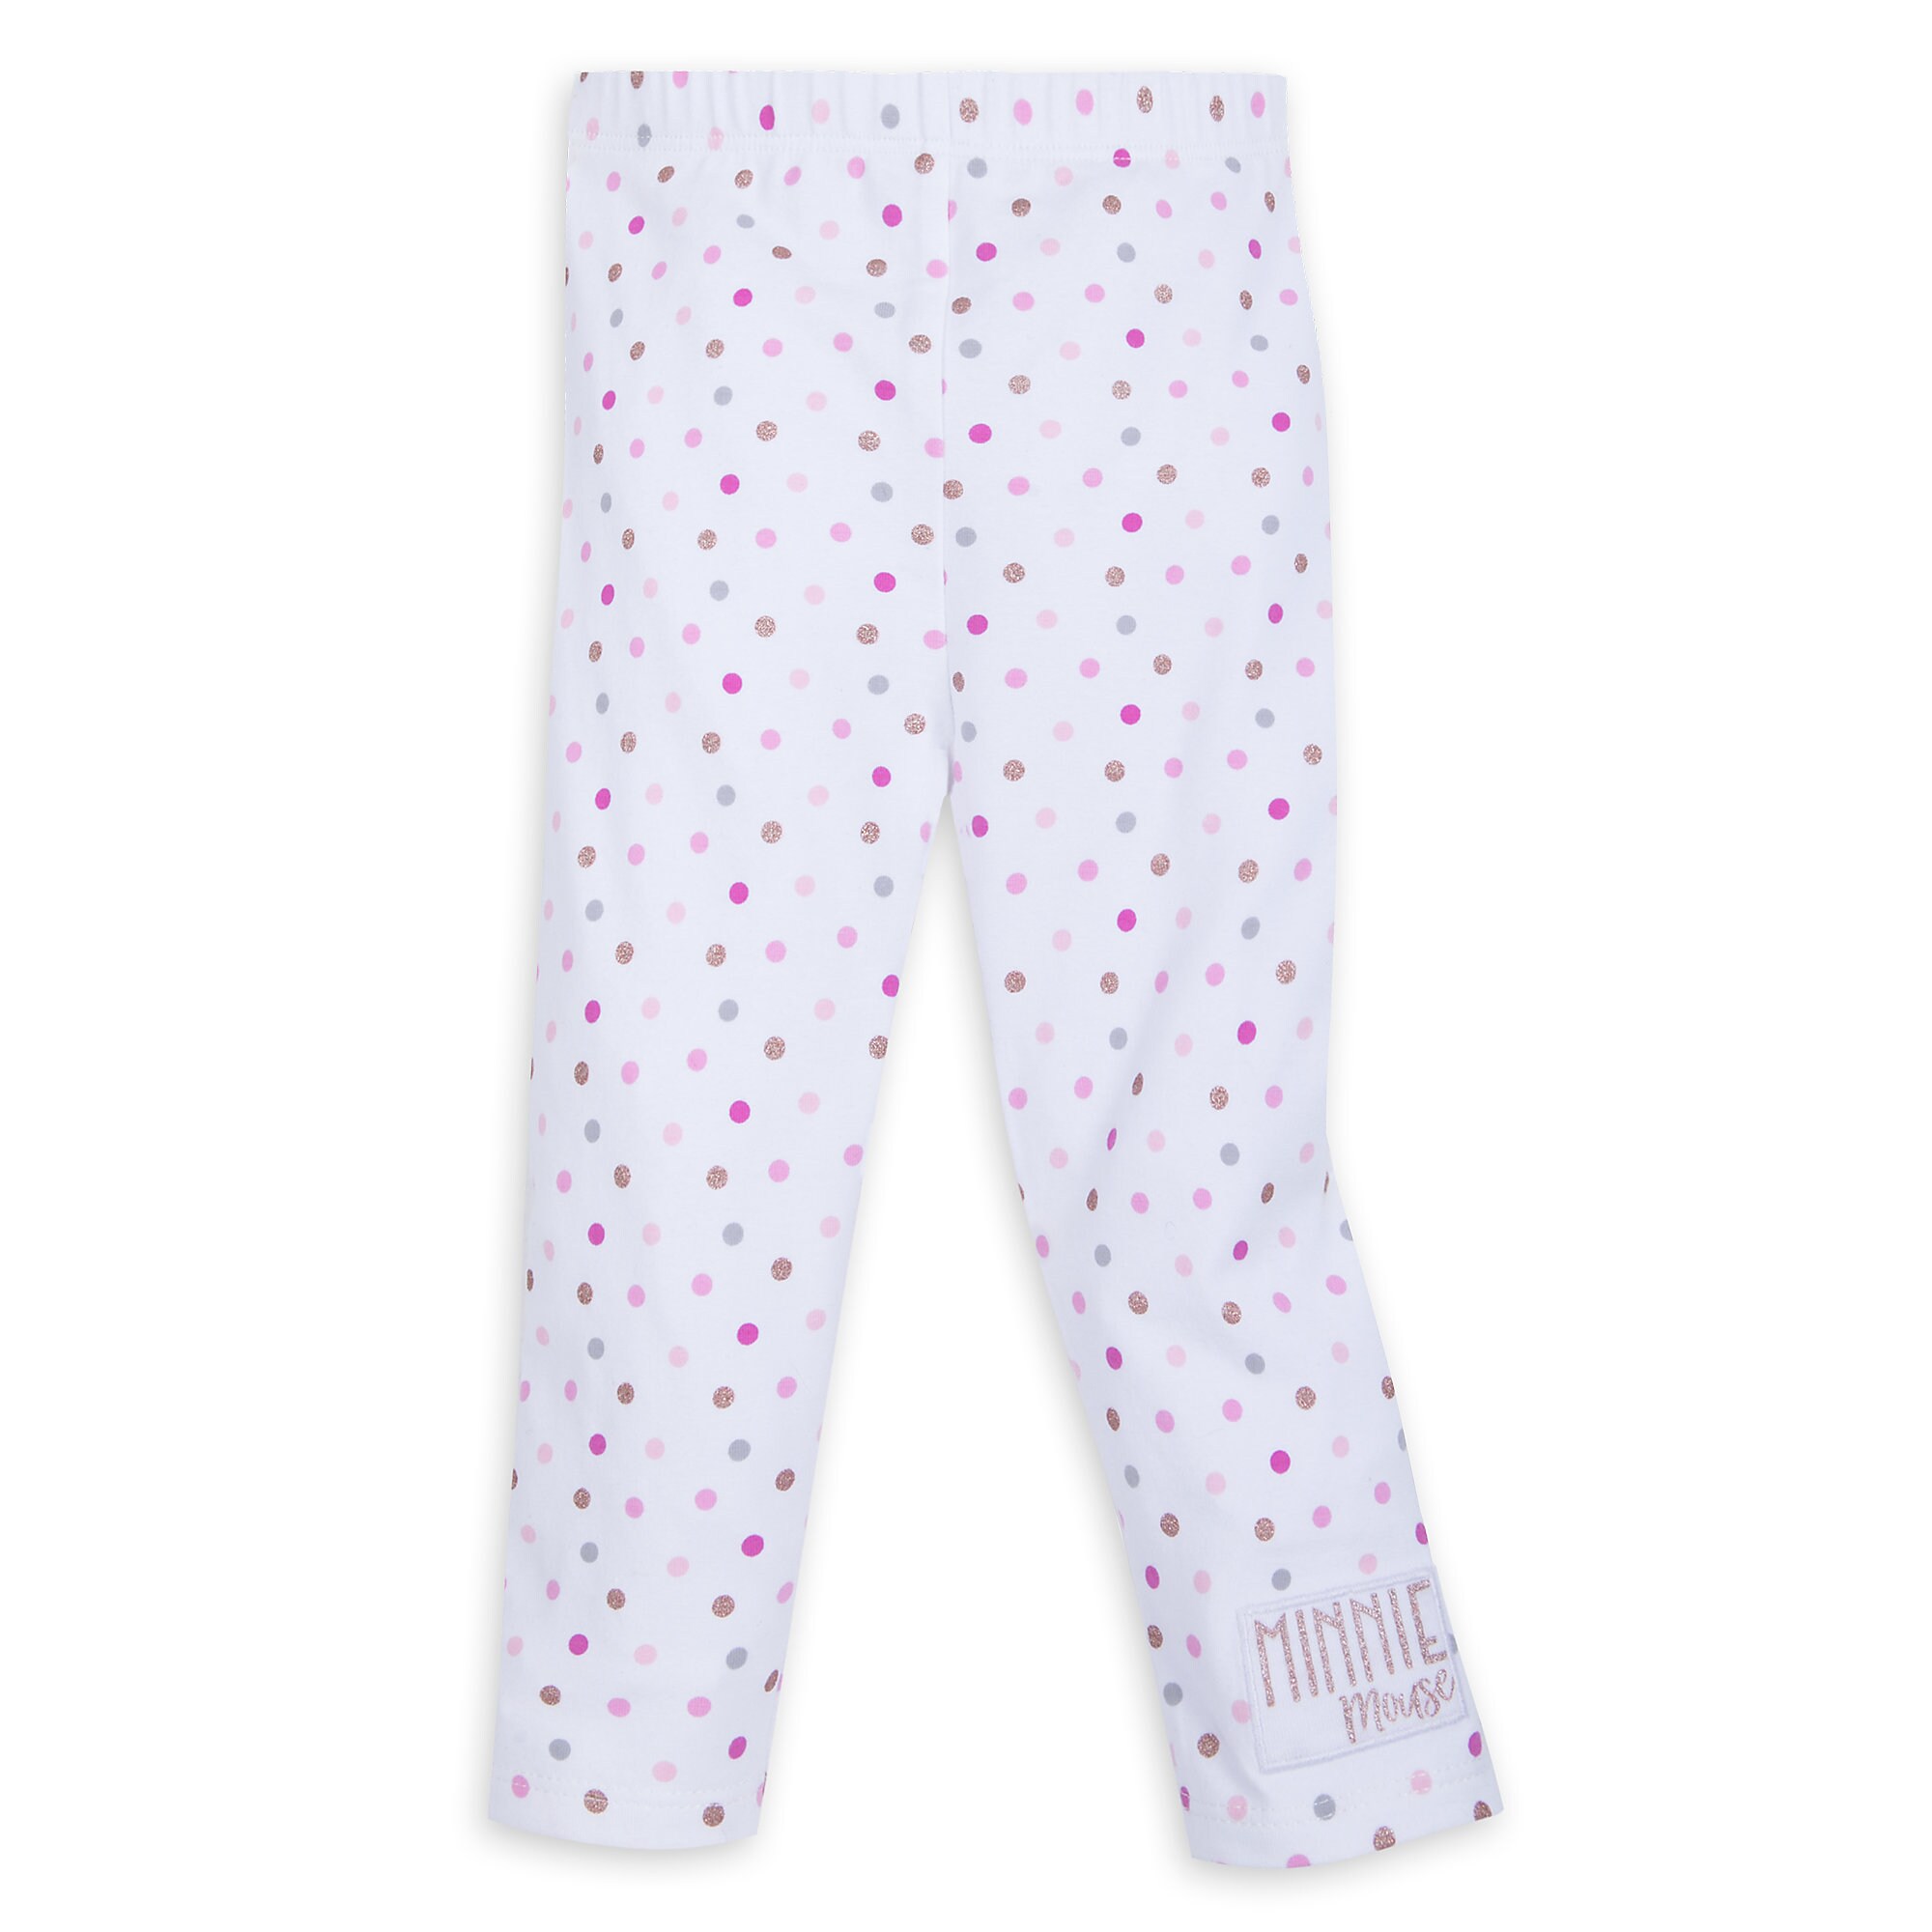 Minnie Mouse Bubble Top and Leggings Set for Girls - Walt Disney World